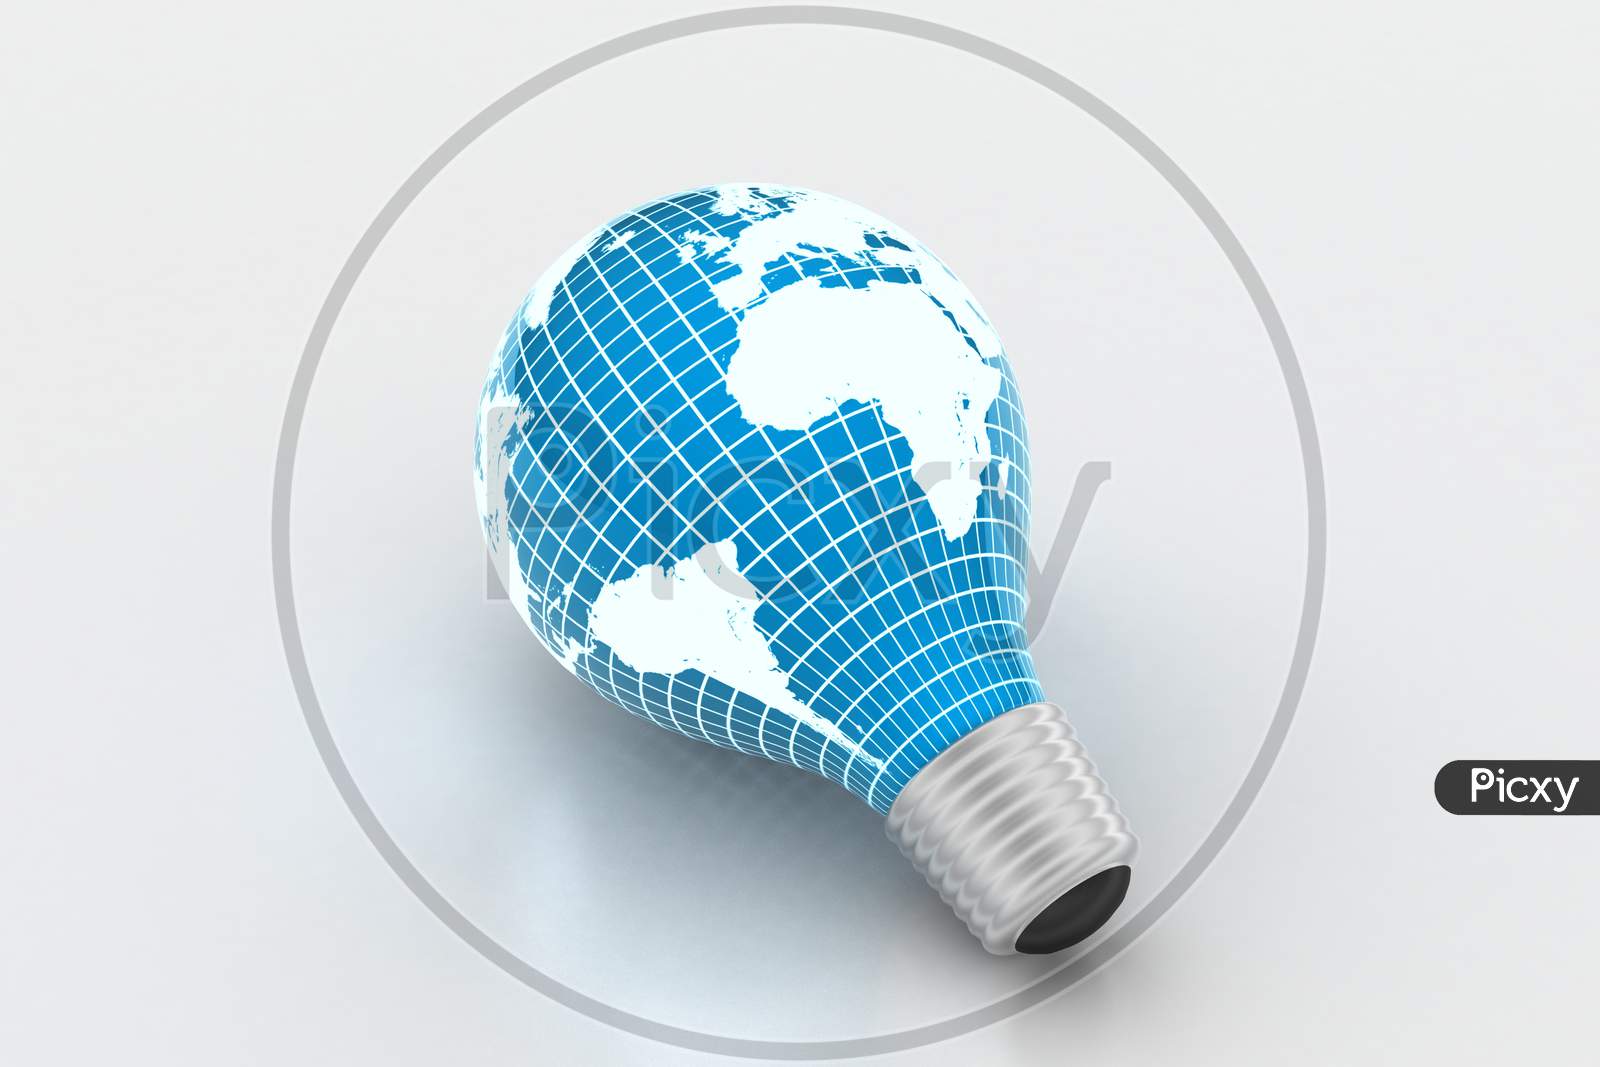 An Electric Light Bulb With A World Map